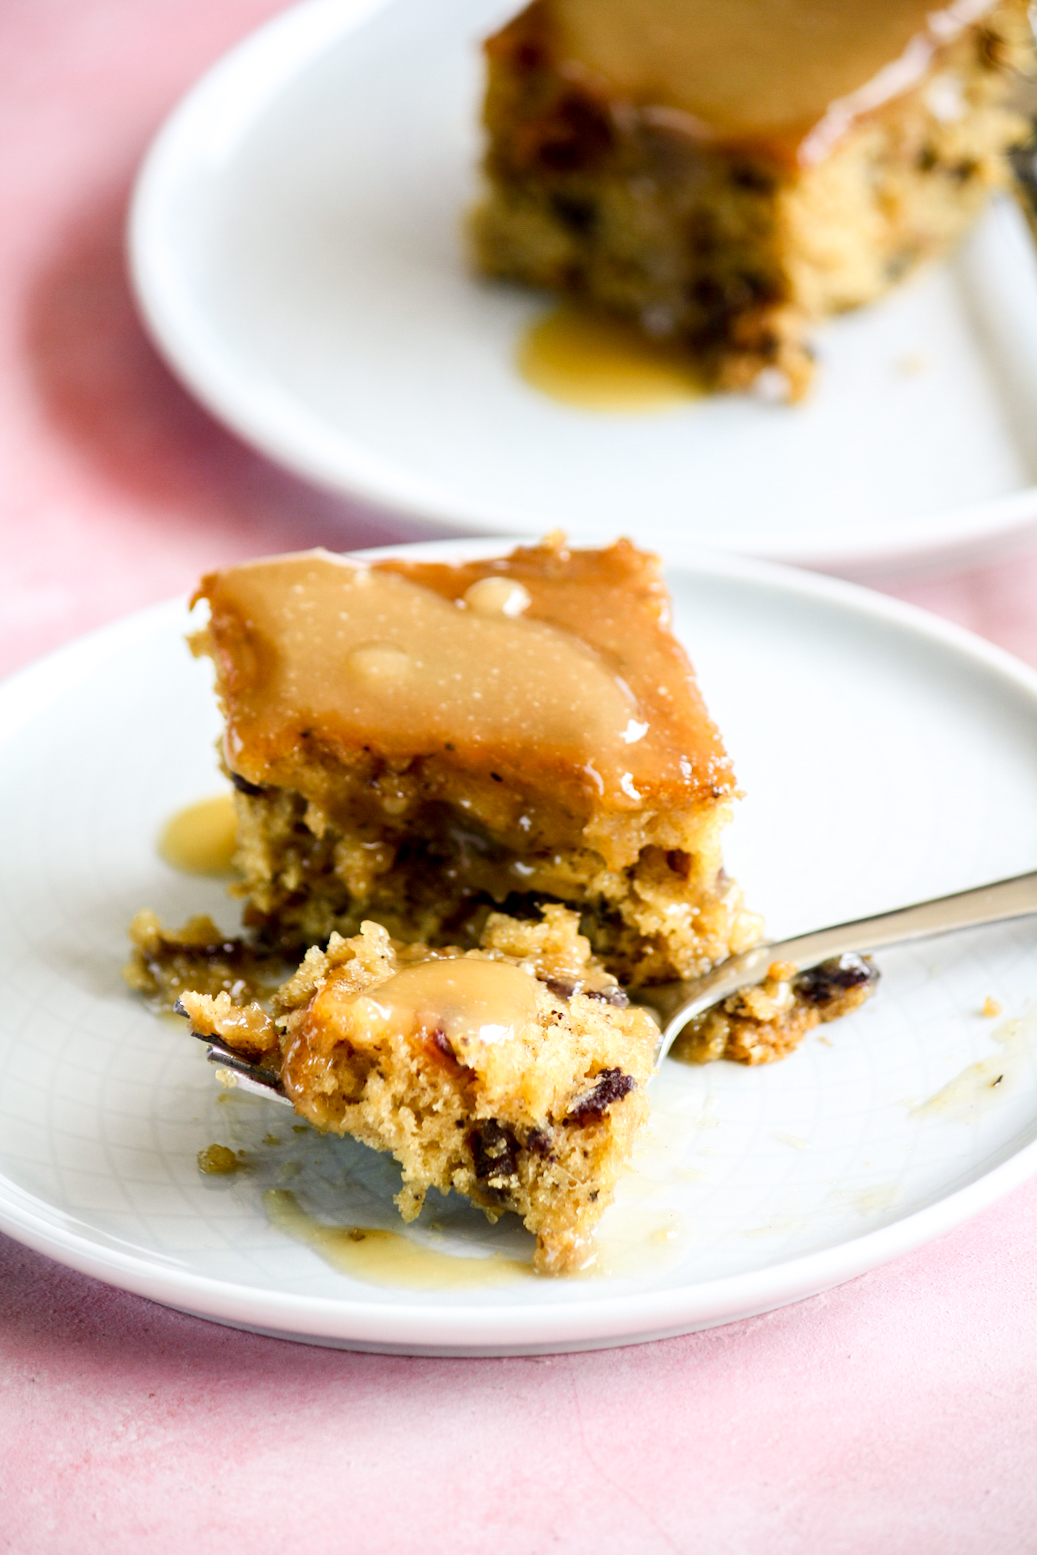 A soft date cake topped with a delicious toffee sauce